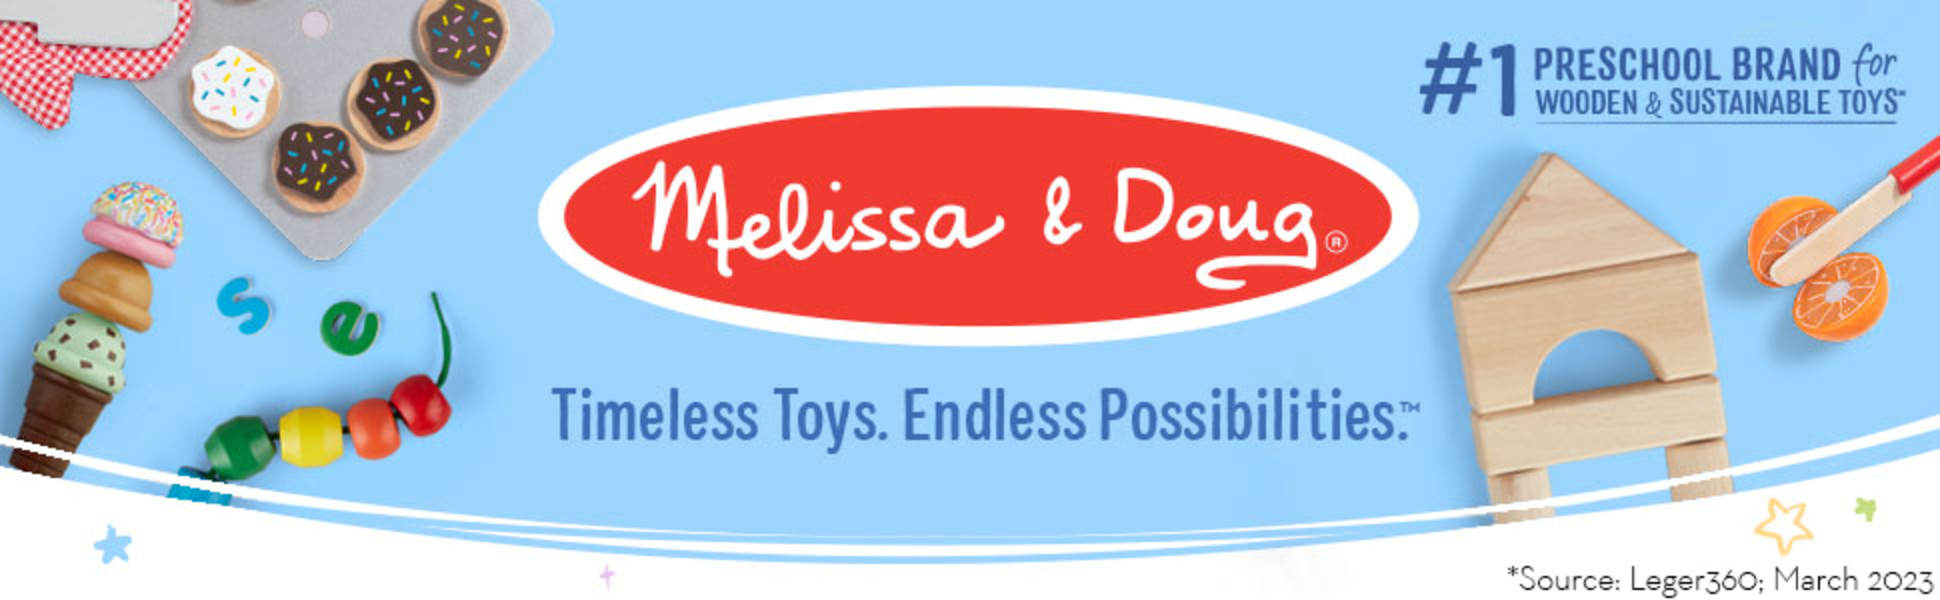 Melissa & Doug Smoothie Maker … curated on LTK